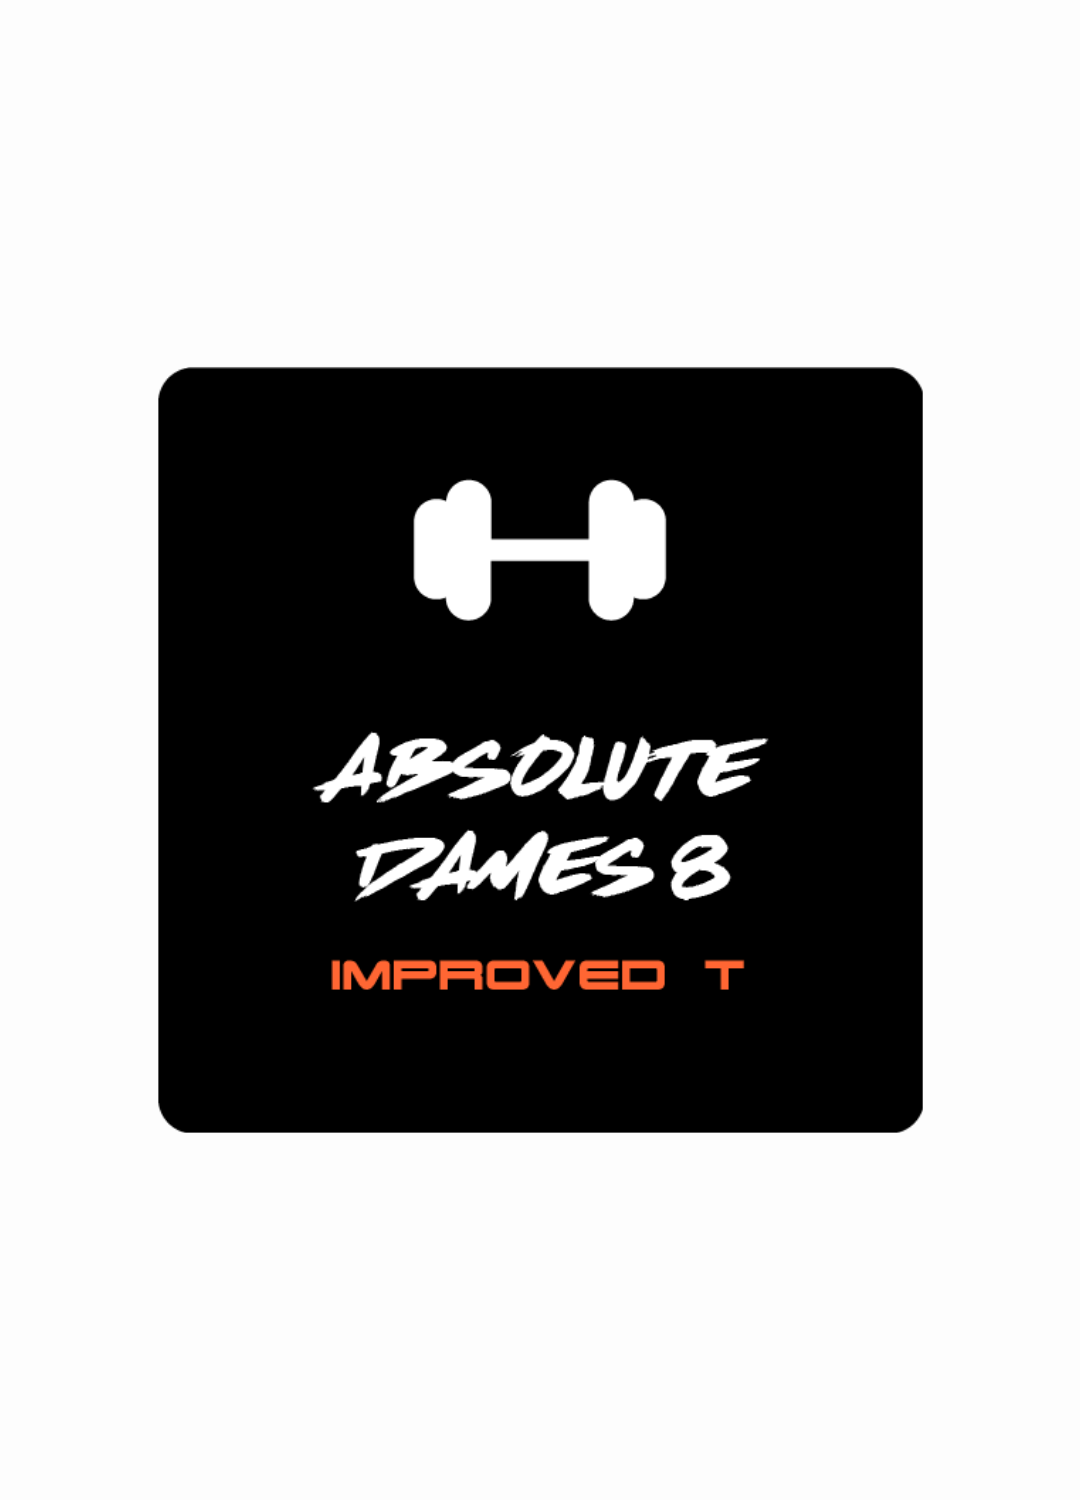 Dames 8 - Improved T (Training - Ebook)